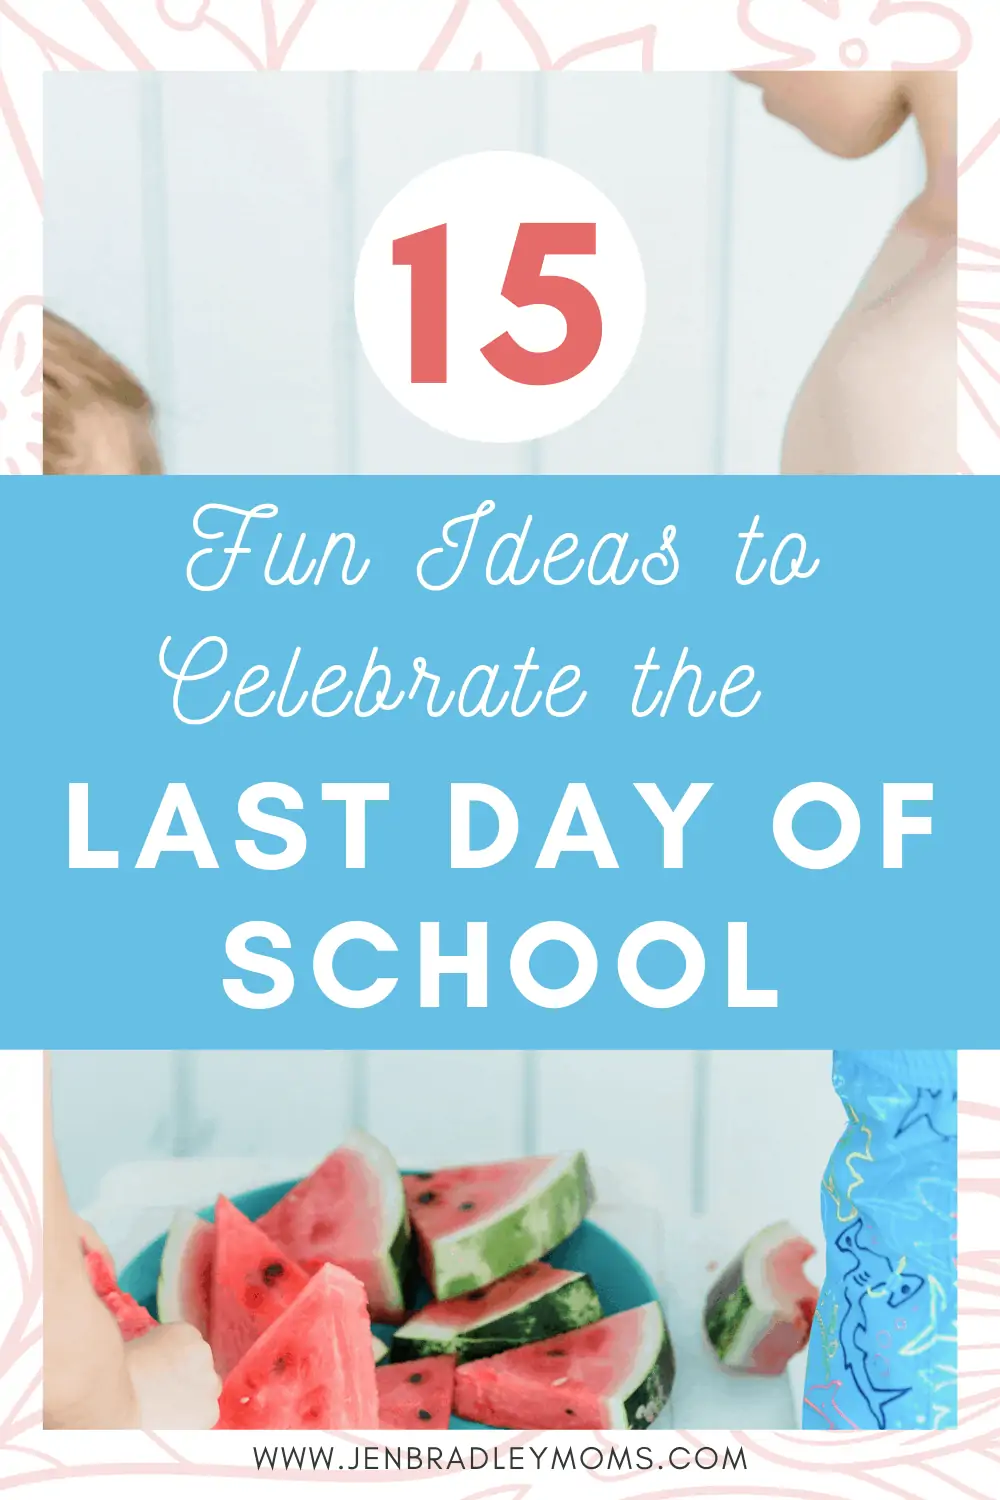 15 Fun Ideas for the Last Day of School with Your Kids